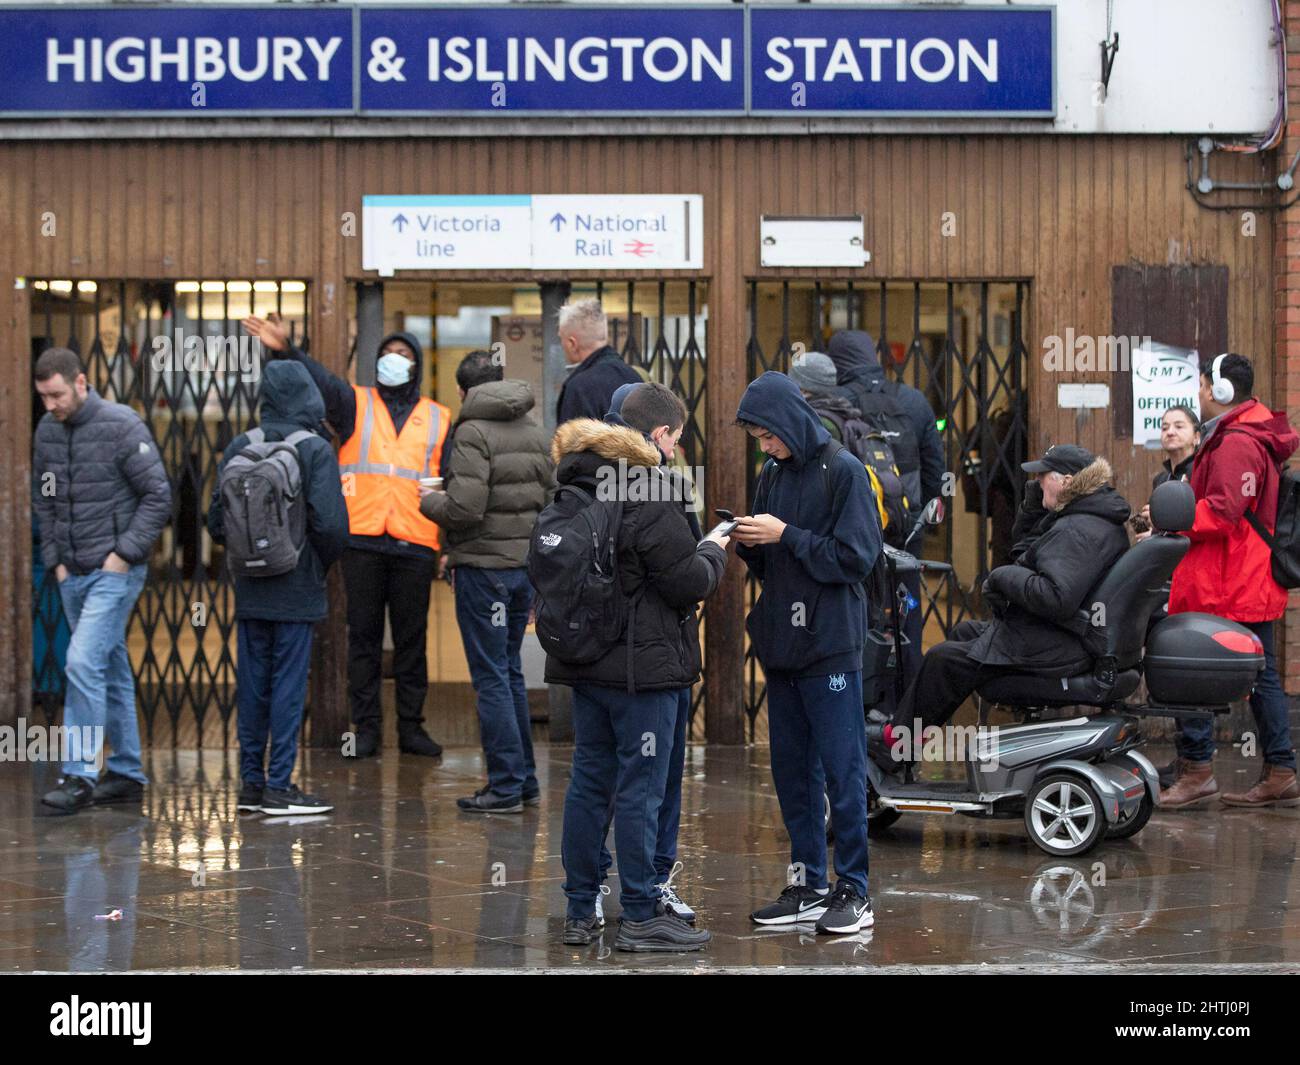 01/03/2022. London, UK. Commuters are seen challenging on strike TFL workers as they arrive at a closed Highbury and Islington Tube Station, as staff Stock Photo